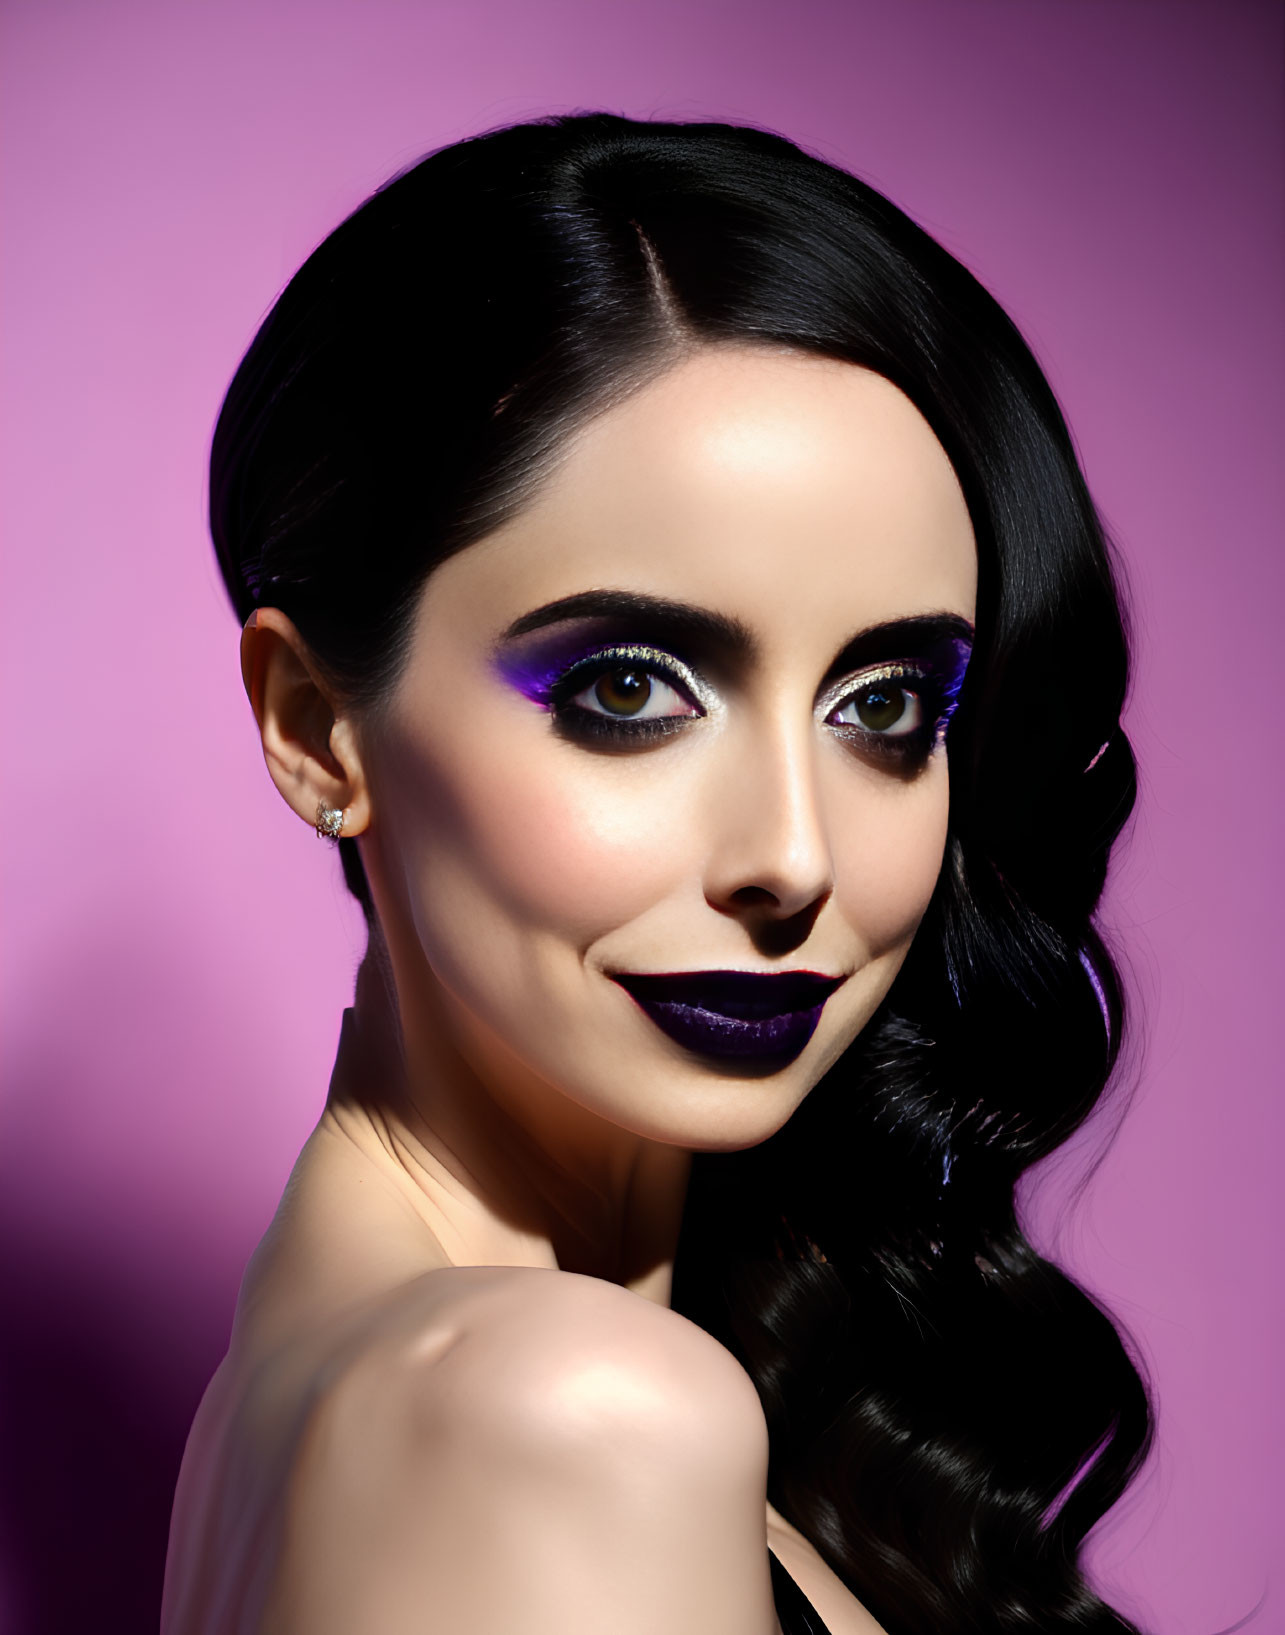 Dark-haired woman with bold purple makeup on purple background